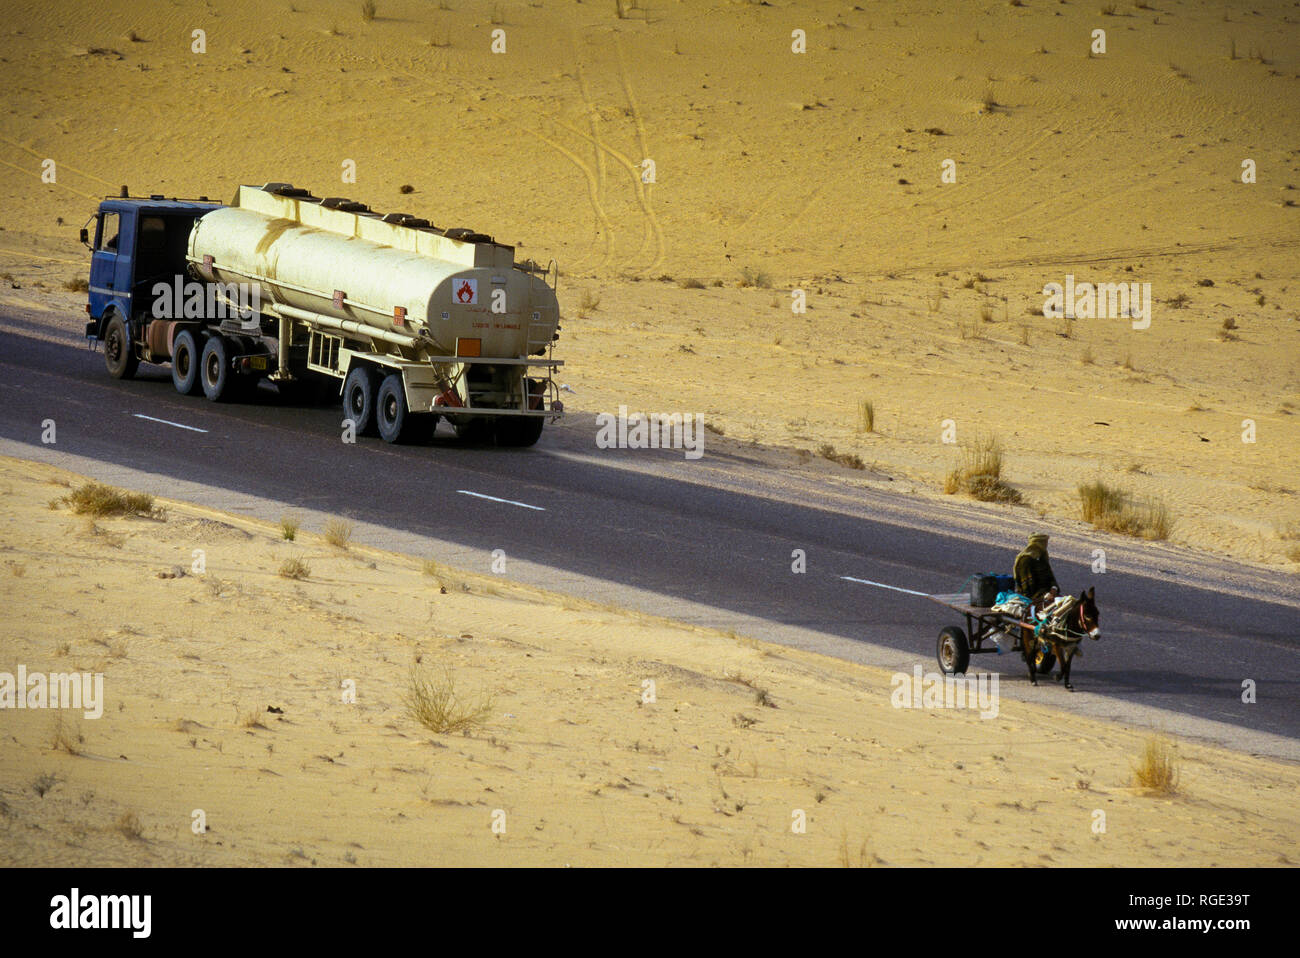 BORDJ EL HAOUAS, ALGERIA - JANUARY 16, 2002: Off-road vehicles and means of transport along the long straight in the Sahara desert, Algeria, North Afr Stock Photo